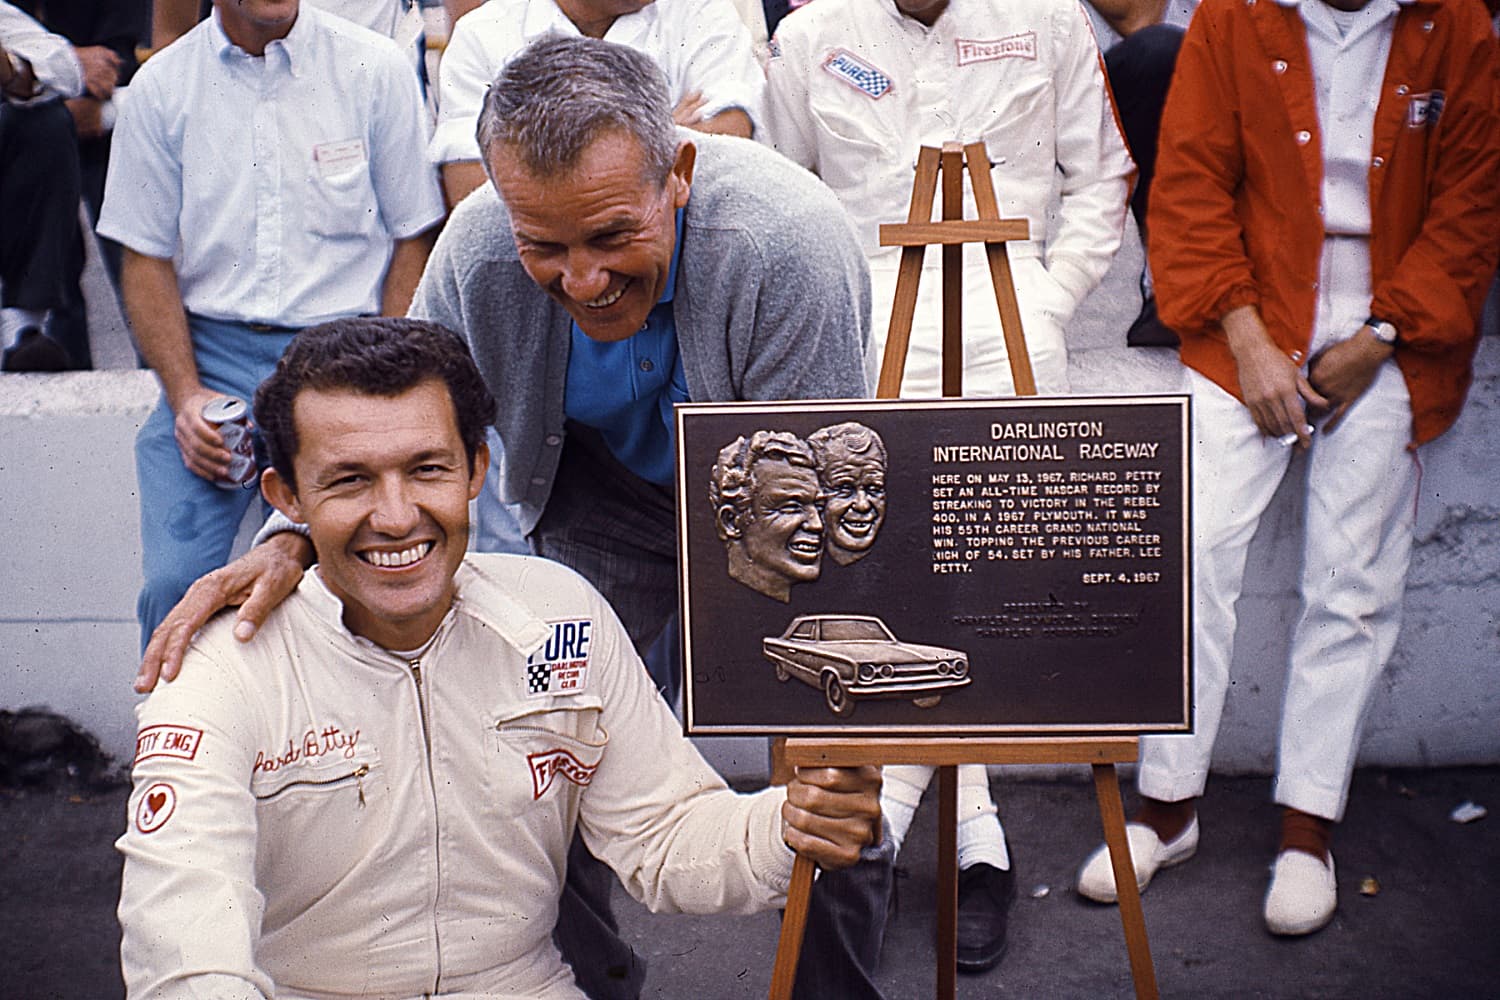 Richard Petty and his father Lee Petty pose with a plaque given to Richard by Darlington Raceway in recognition of his record-setting 55th career win. | ISC Images & Archives via Getty Images